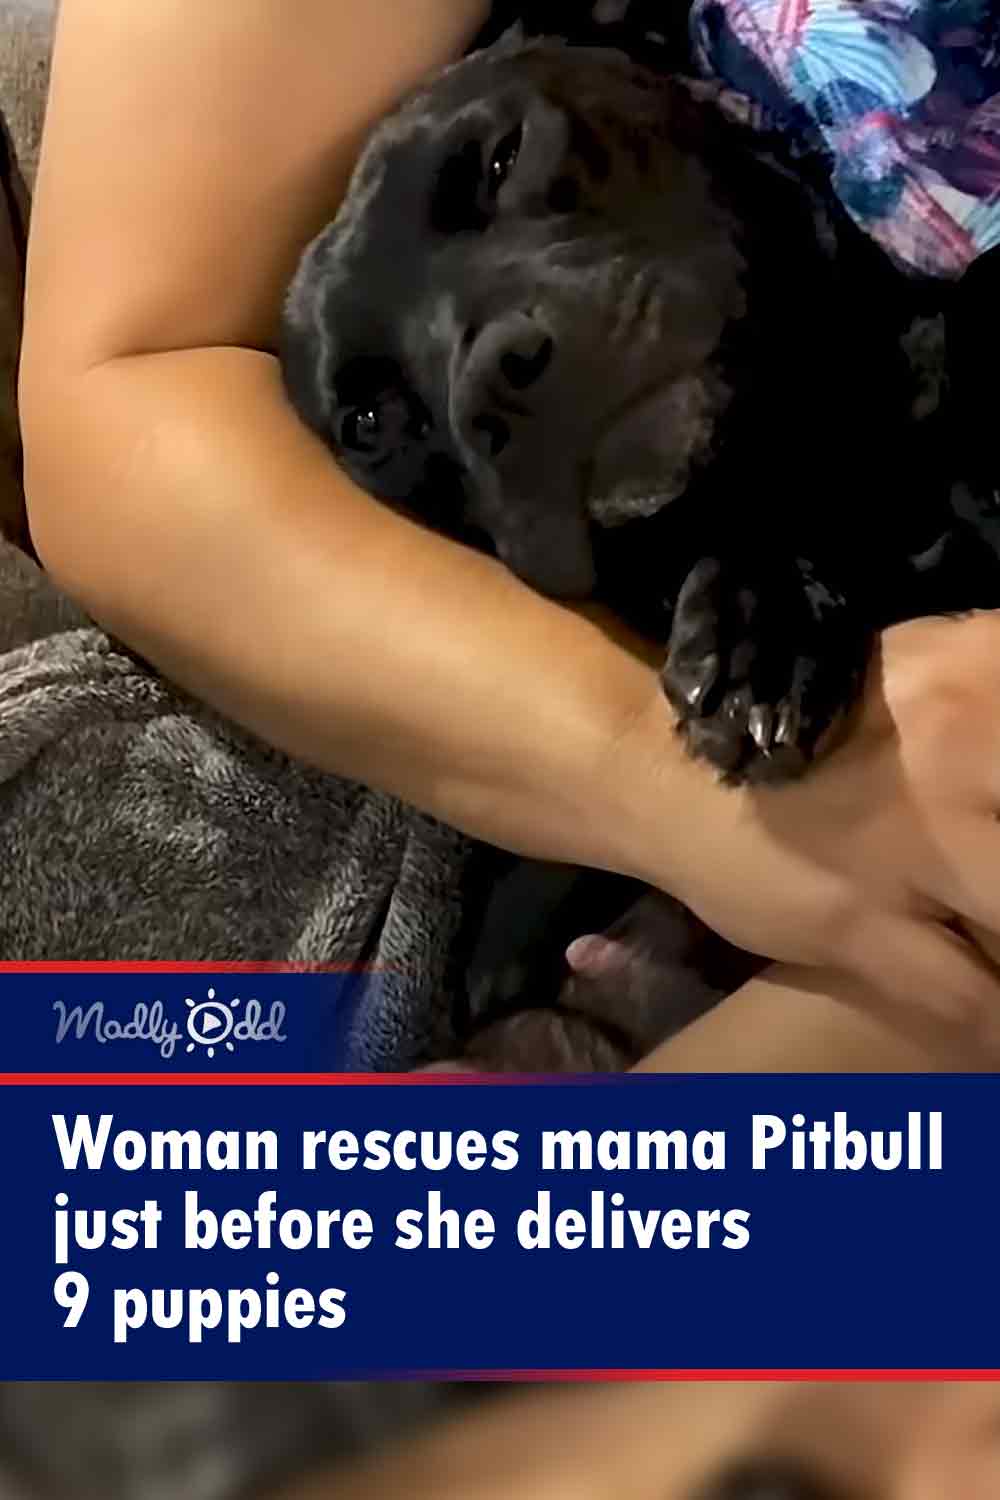 Woman rescues mama Pitbull just before she delivers 9 puppies